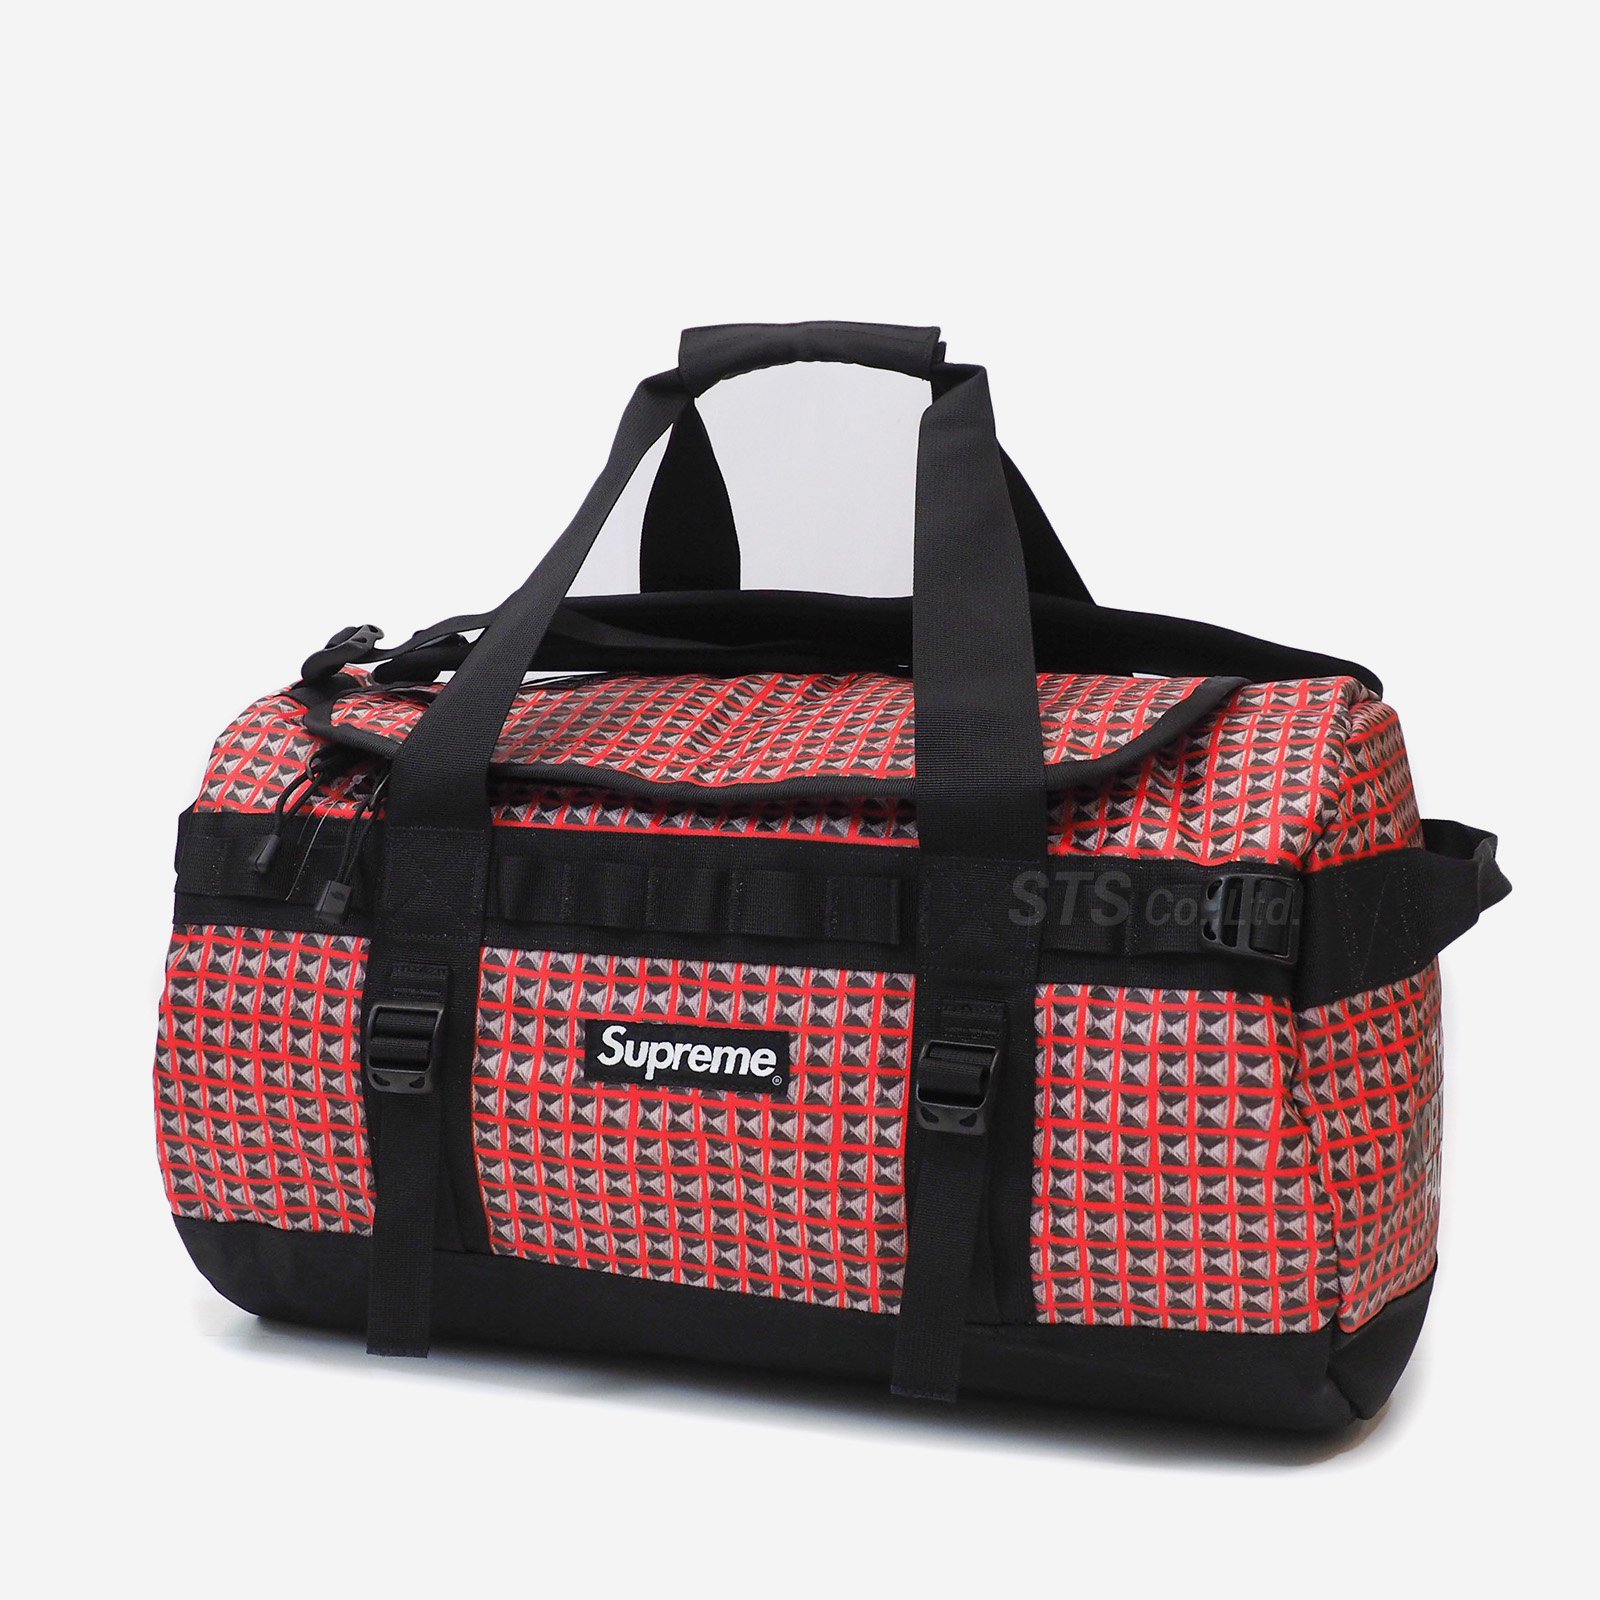 Supreme The North Face Duffle Bagボストンバッグ - ボストンバッグ